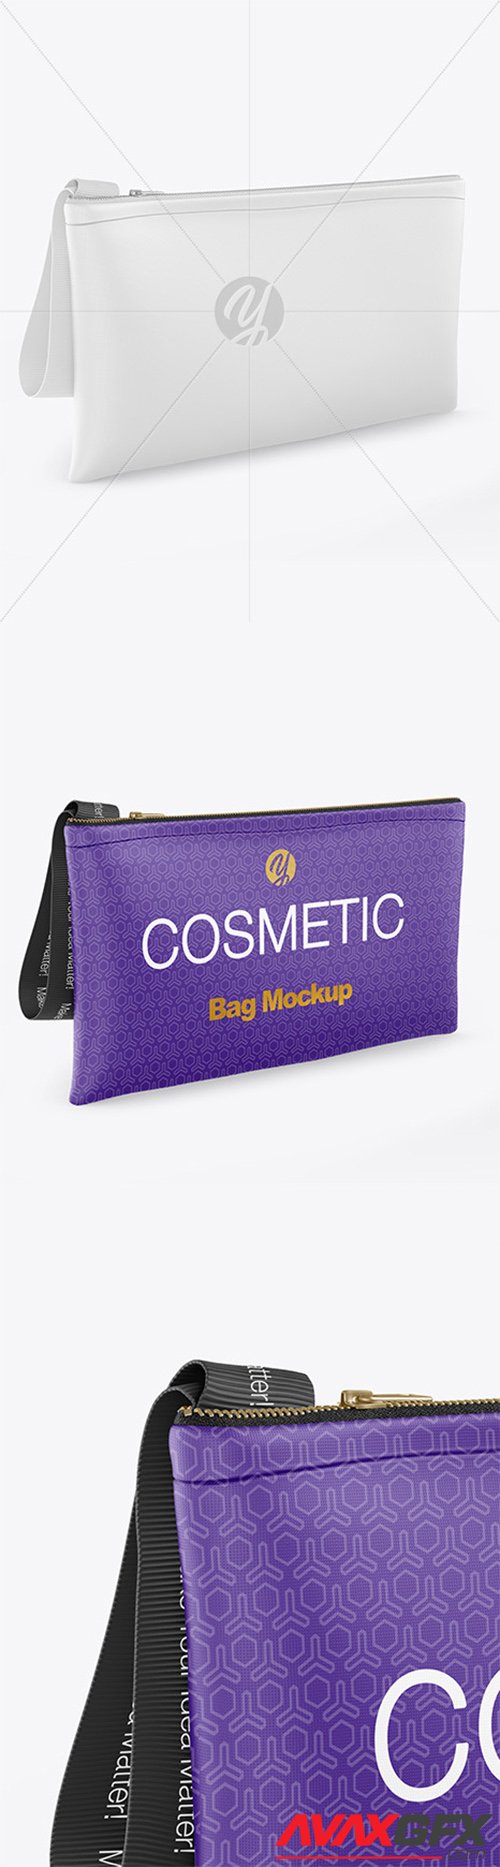 Download 46+ Glossy Cosmetic Bag Mockup Pictures Yellowimages ...